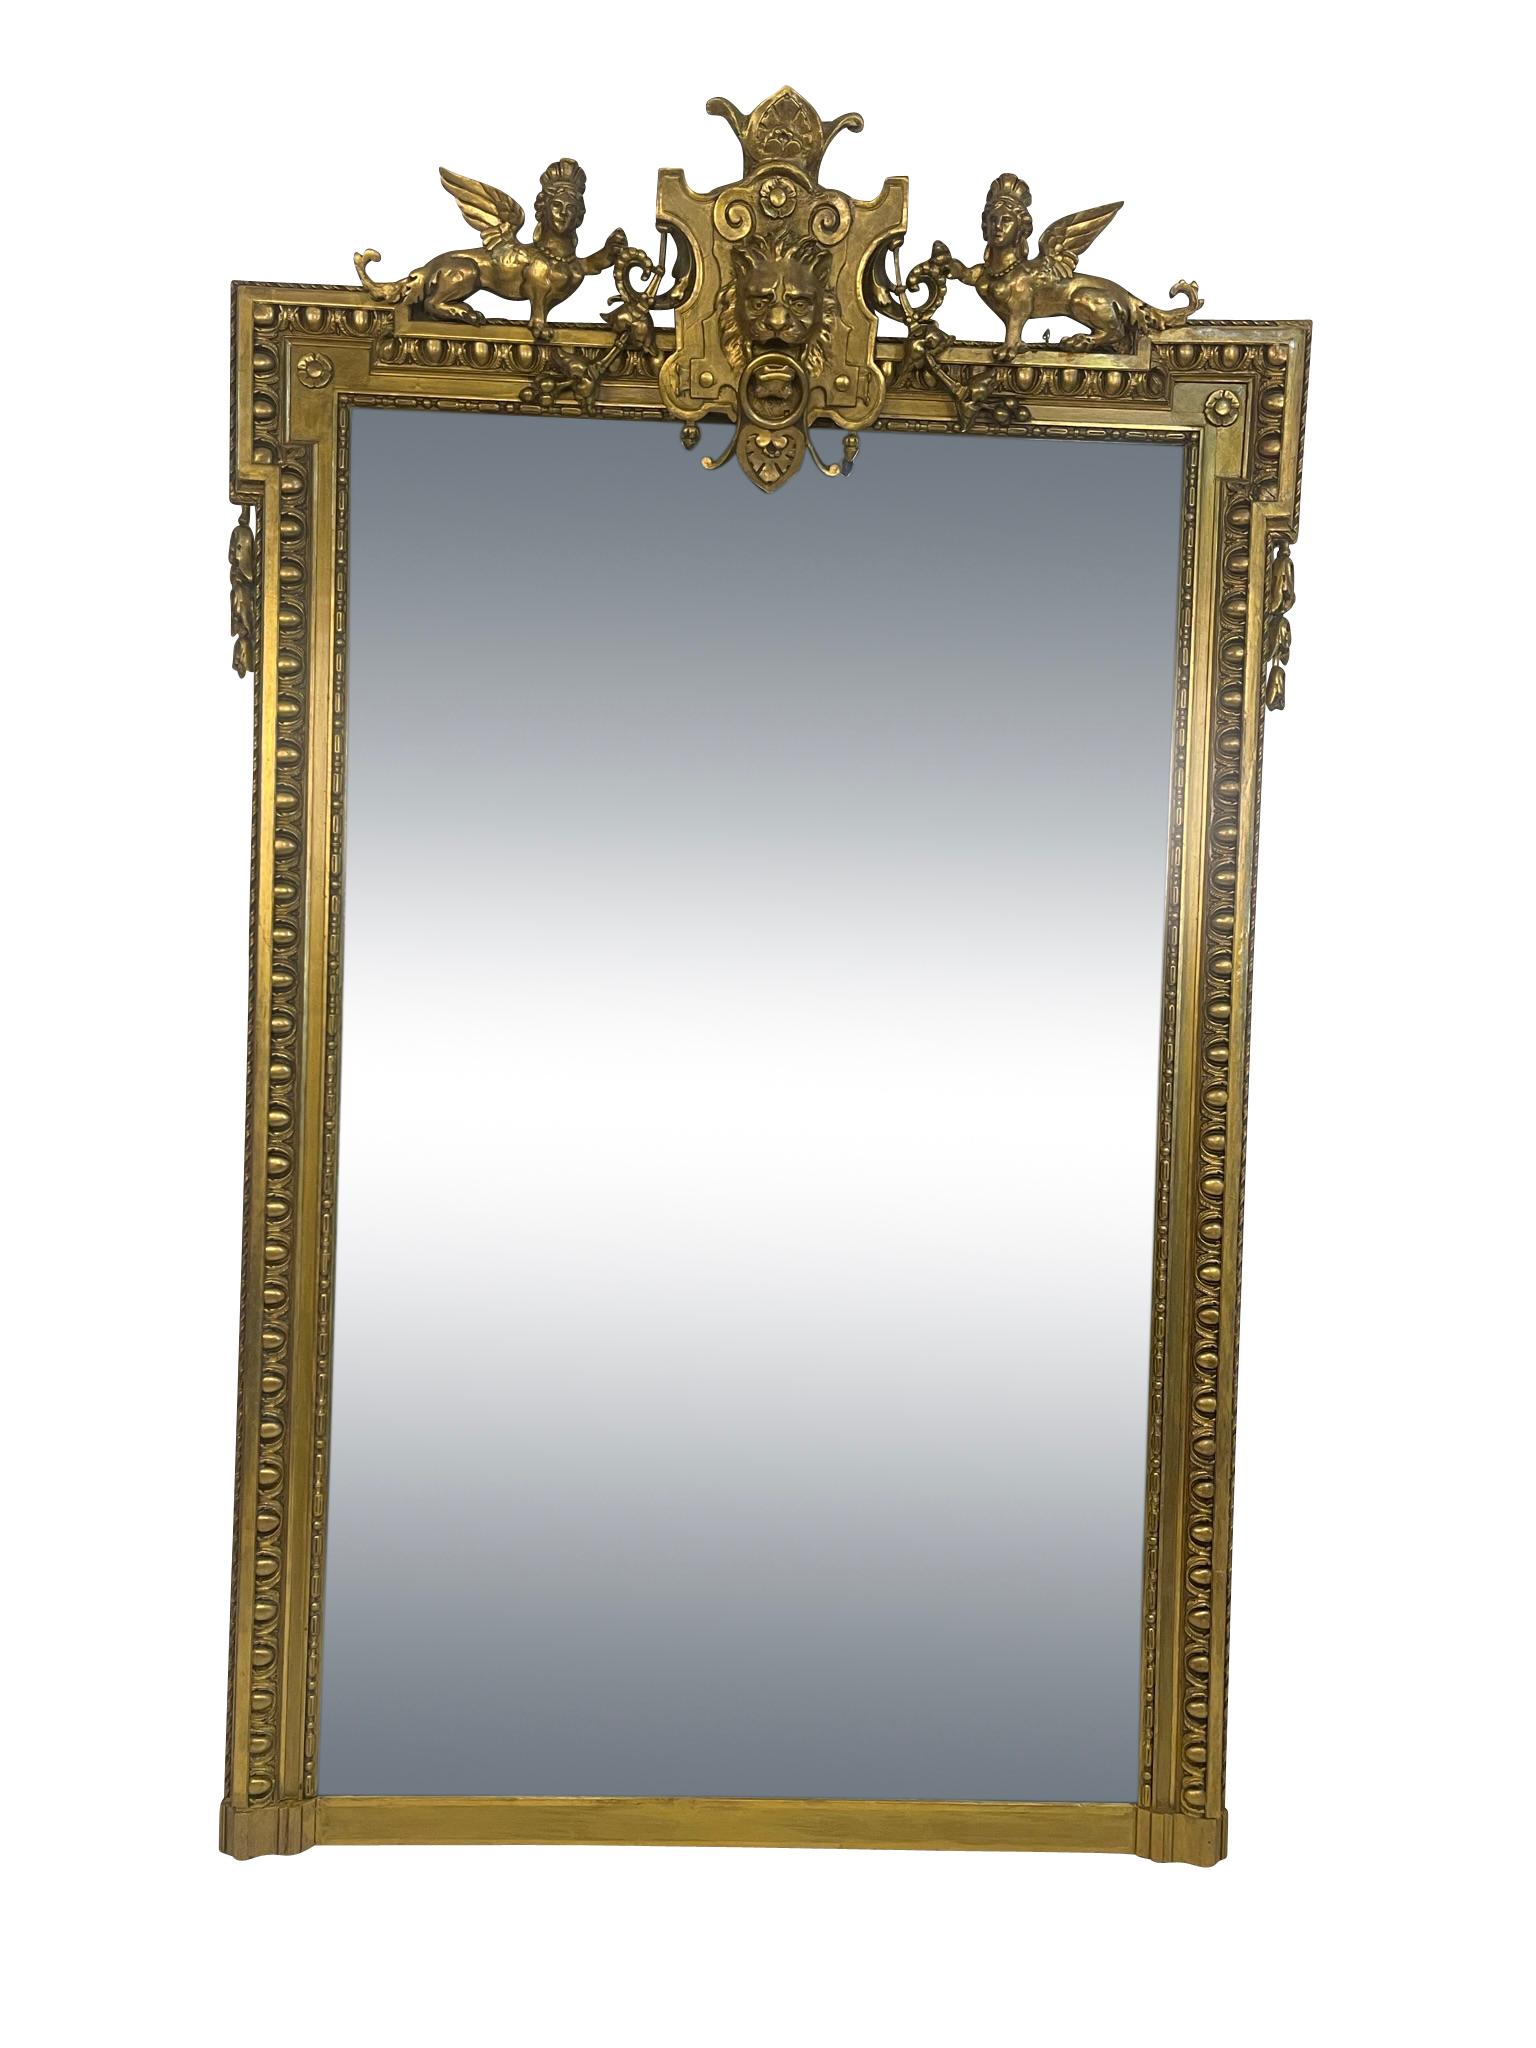 Neoclassical 19th Century English Pier Mirror Decorated with Lions Head and Figural Griffins For Sale